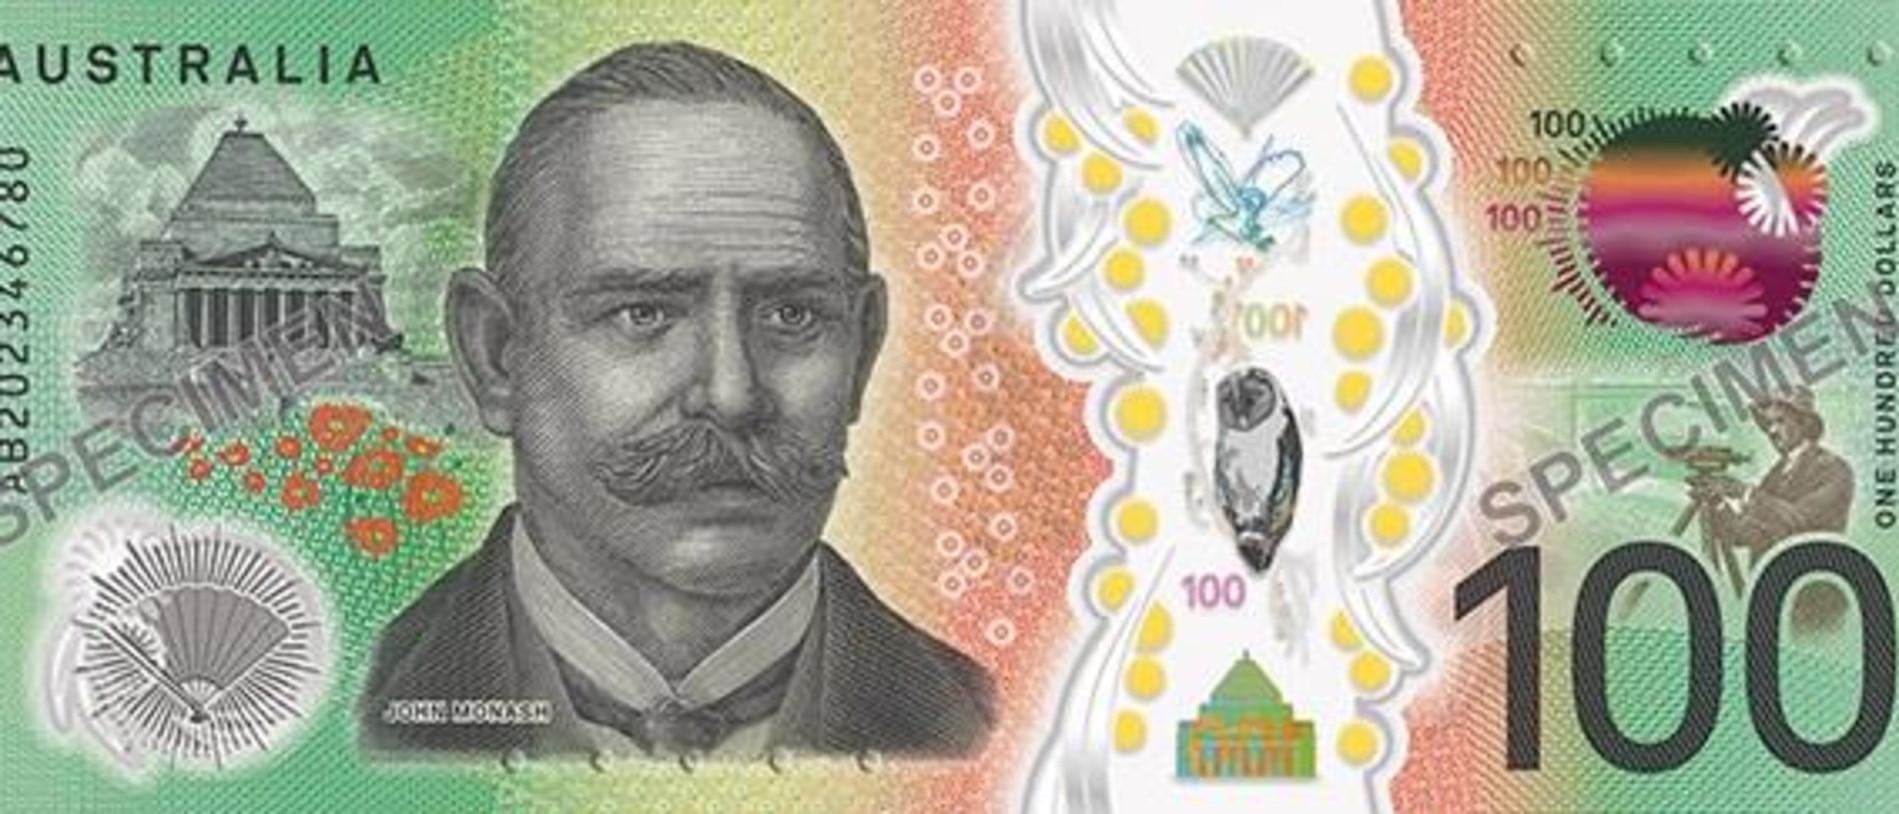 The side of the $100 note showing Sir John Monash. Picture: supplied